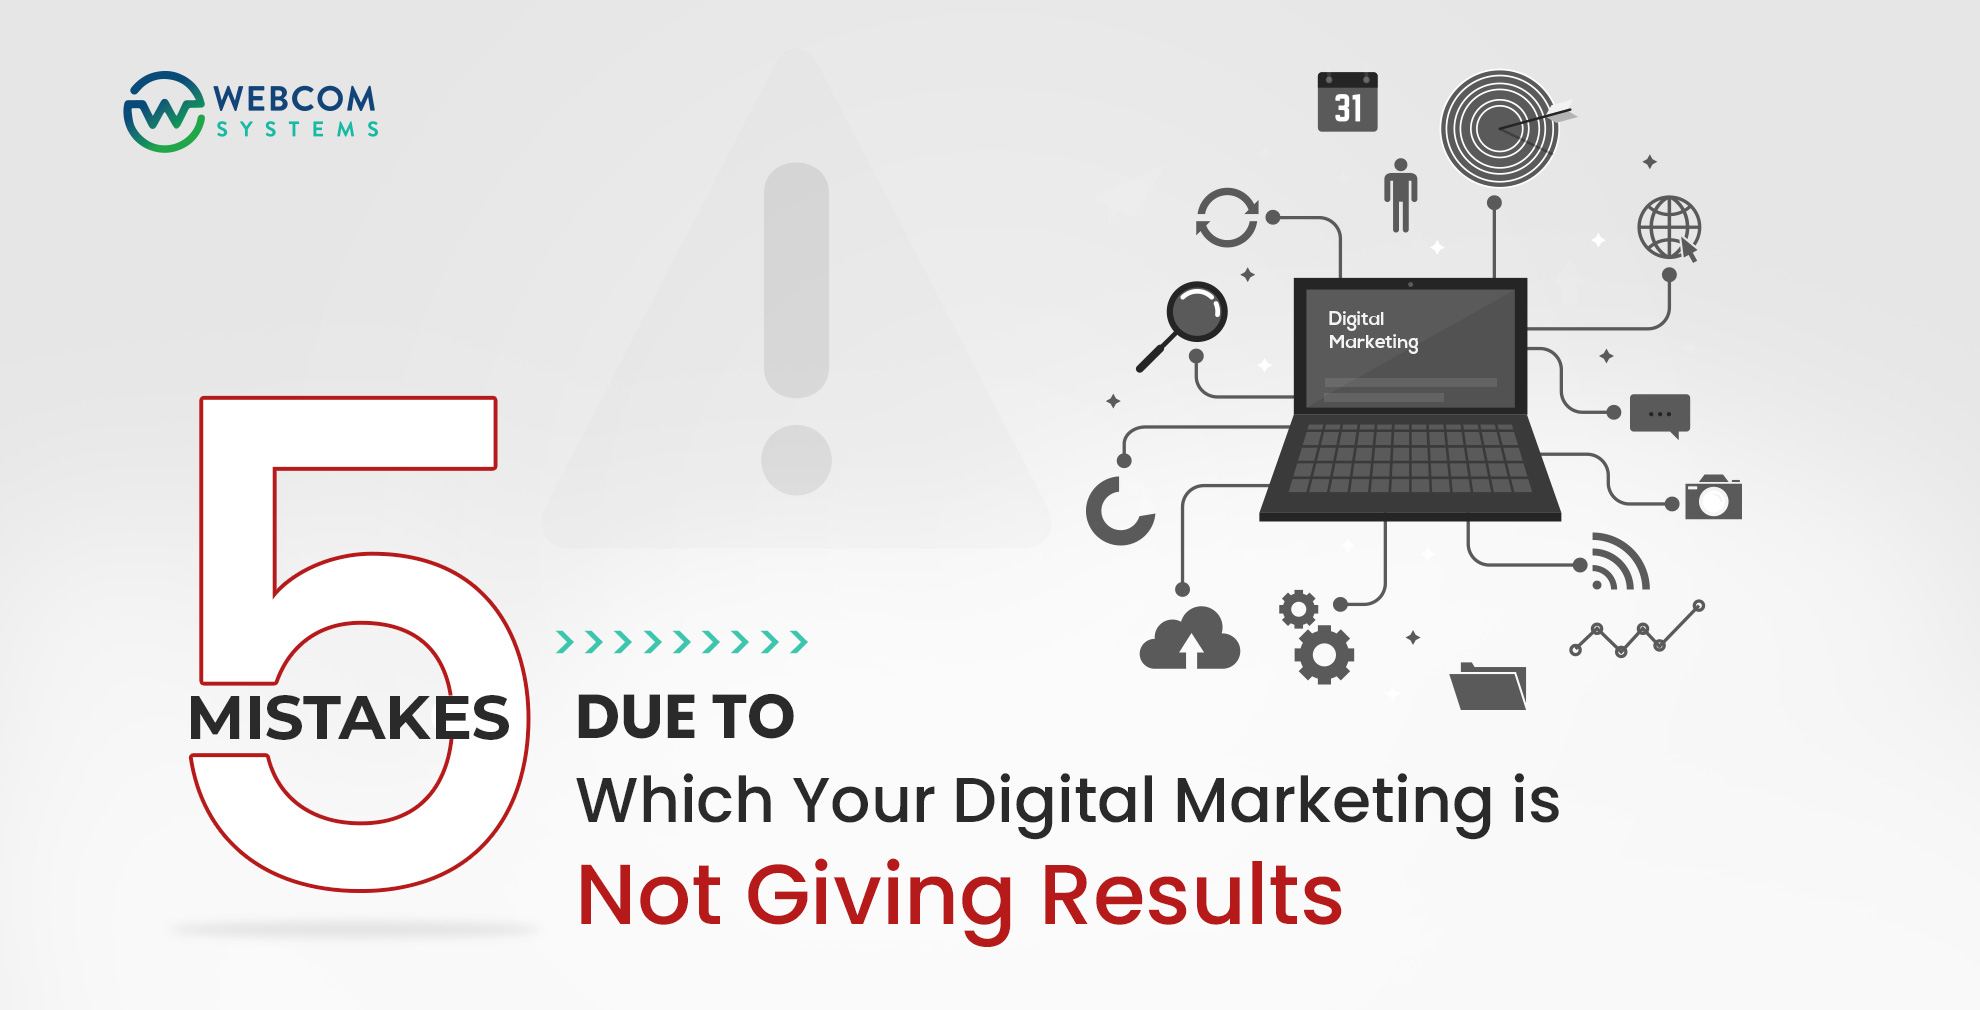 5 Mistakes Due To Which Your Digital Marketing Is Not Giving Results